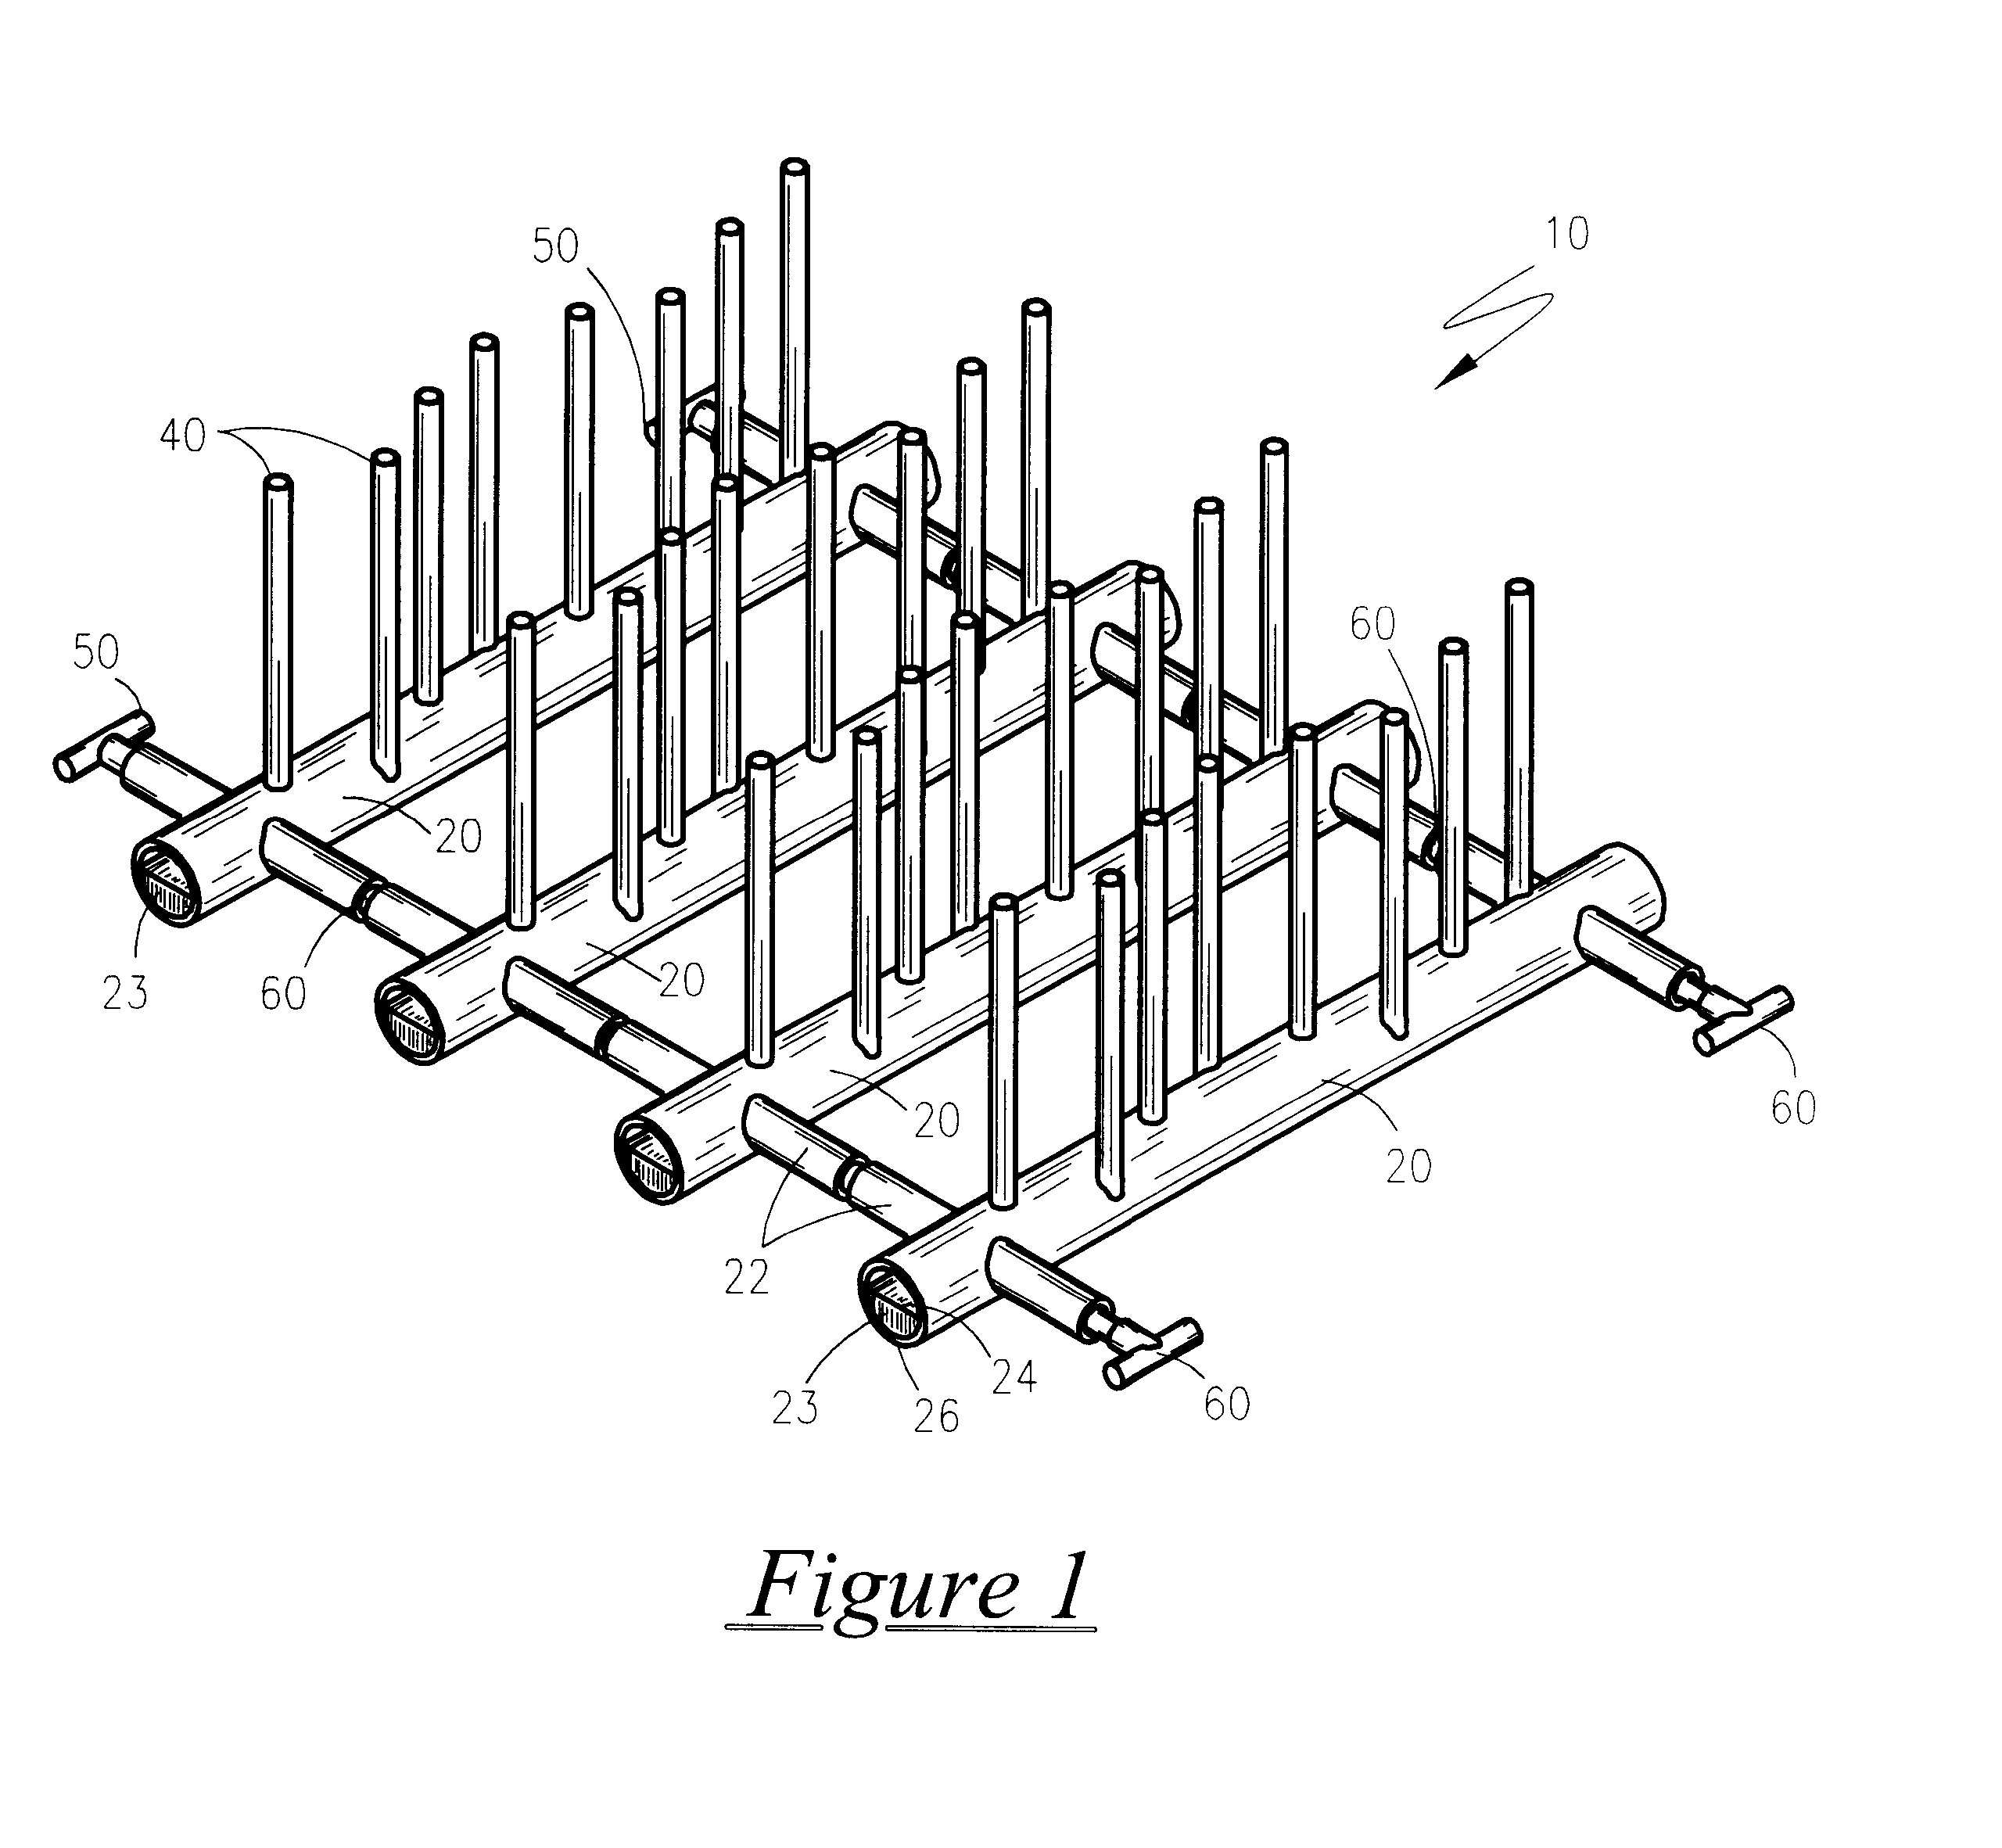 Reticulated fish aggregation apparatus